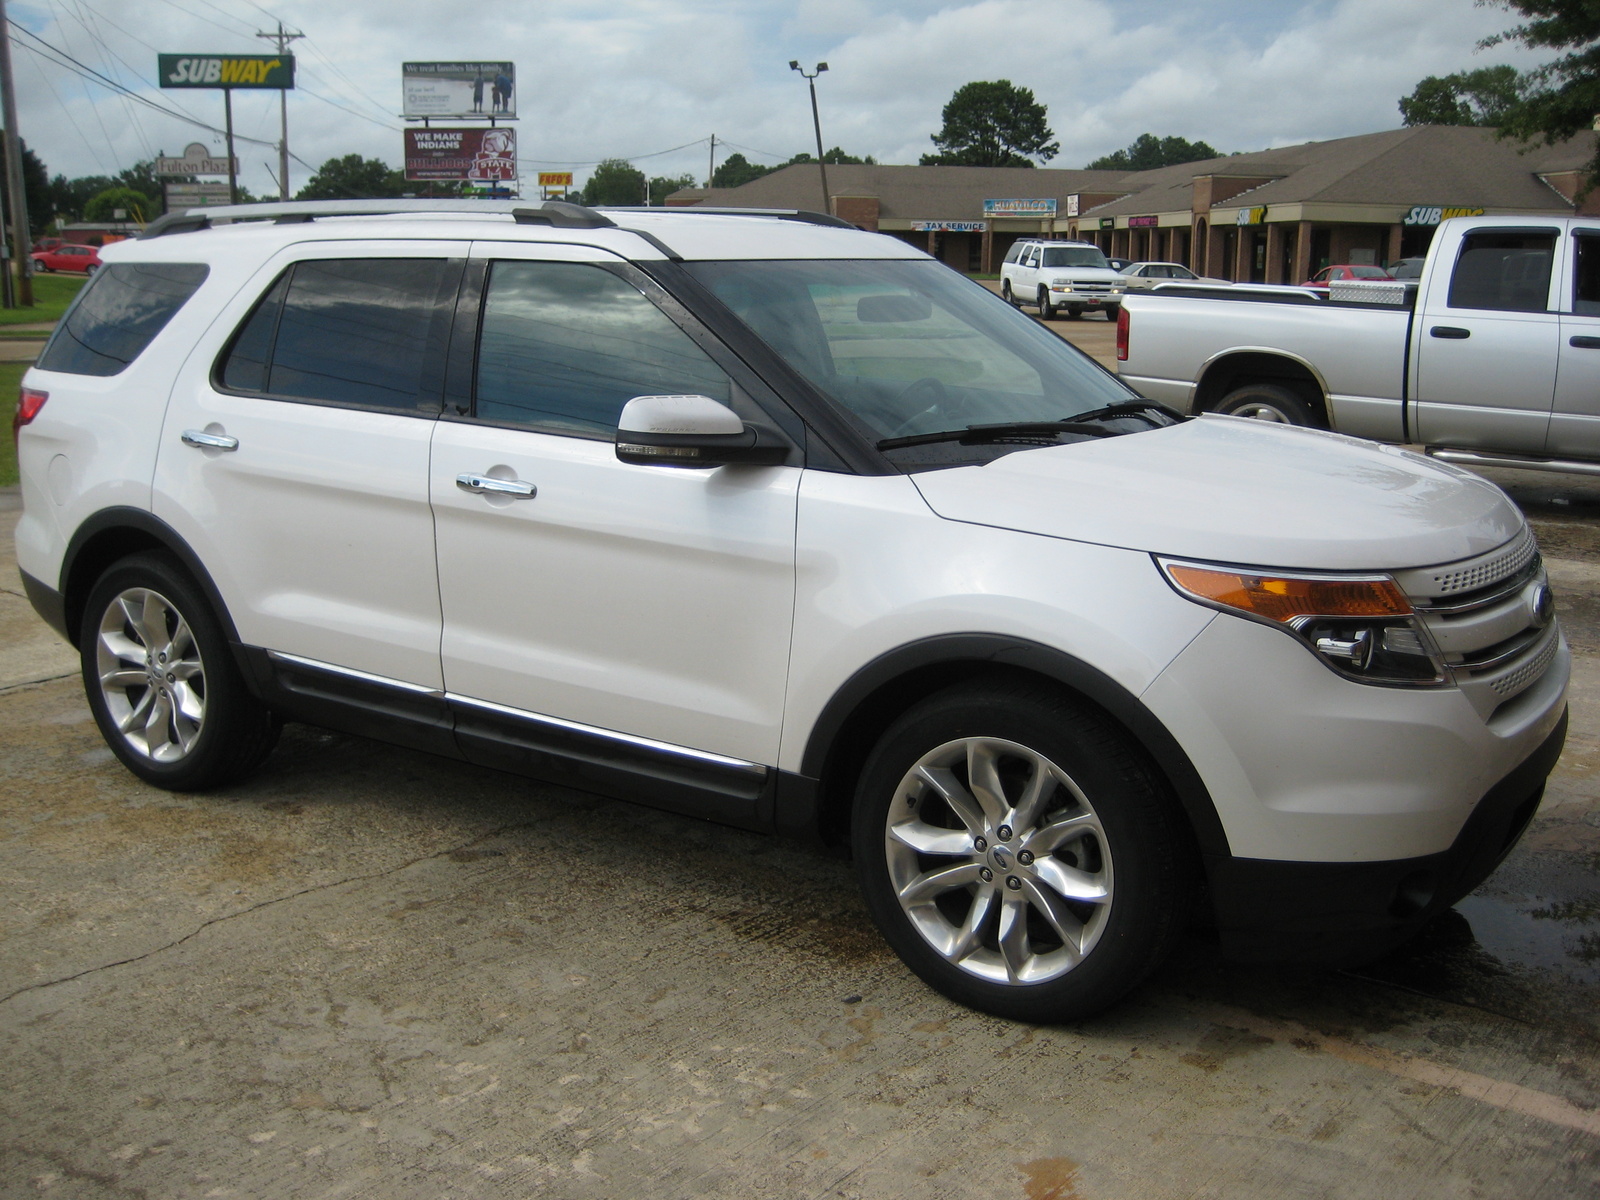 2011 Ford explorer limited video #6